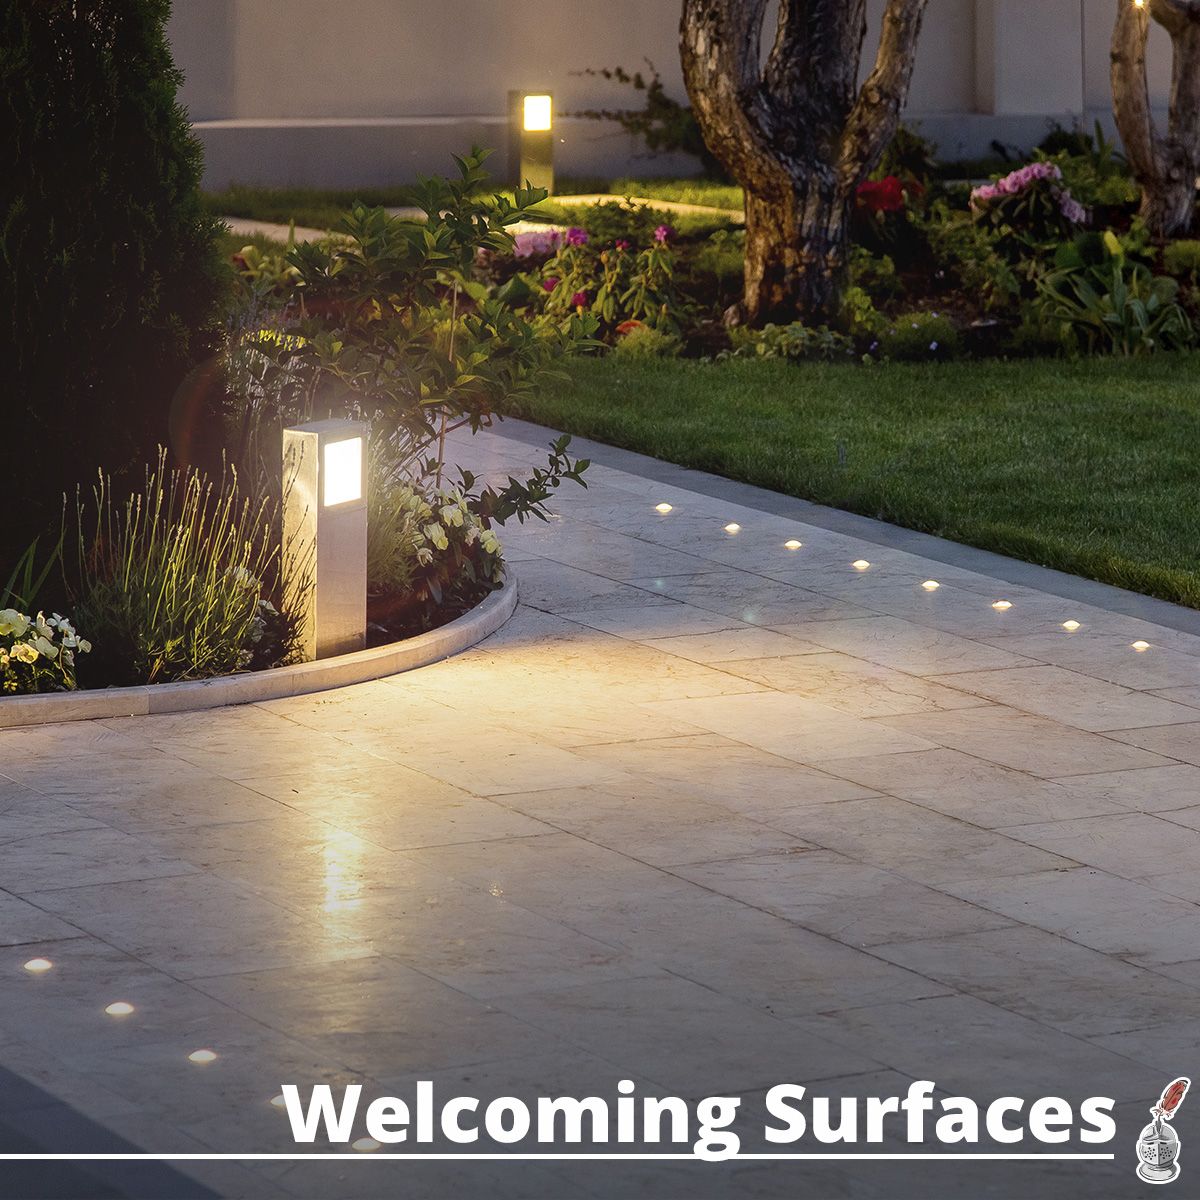 Welcoming Surfaces